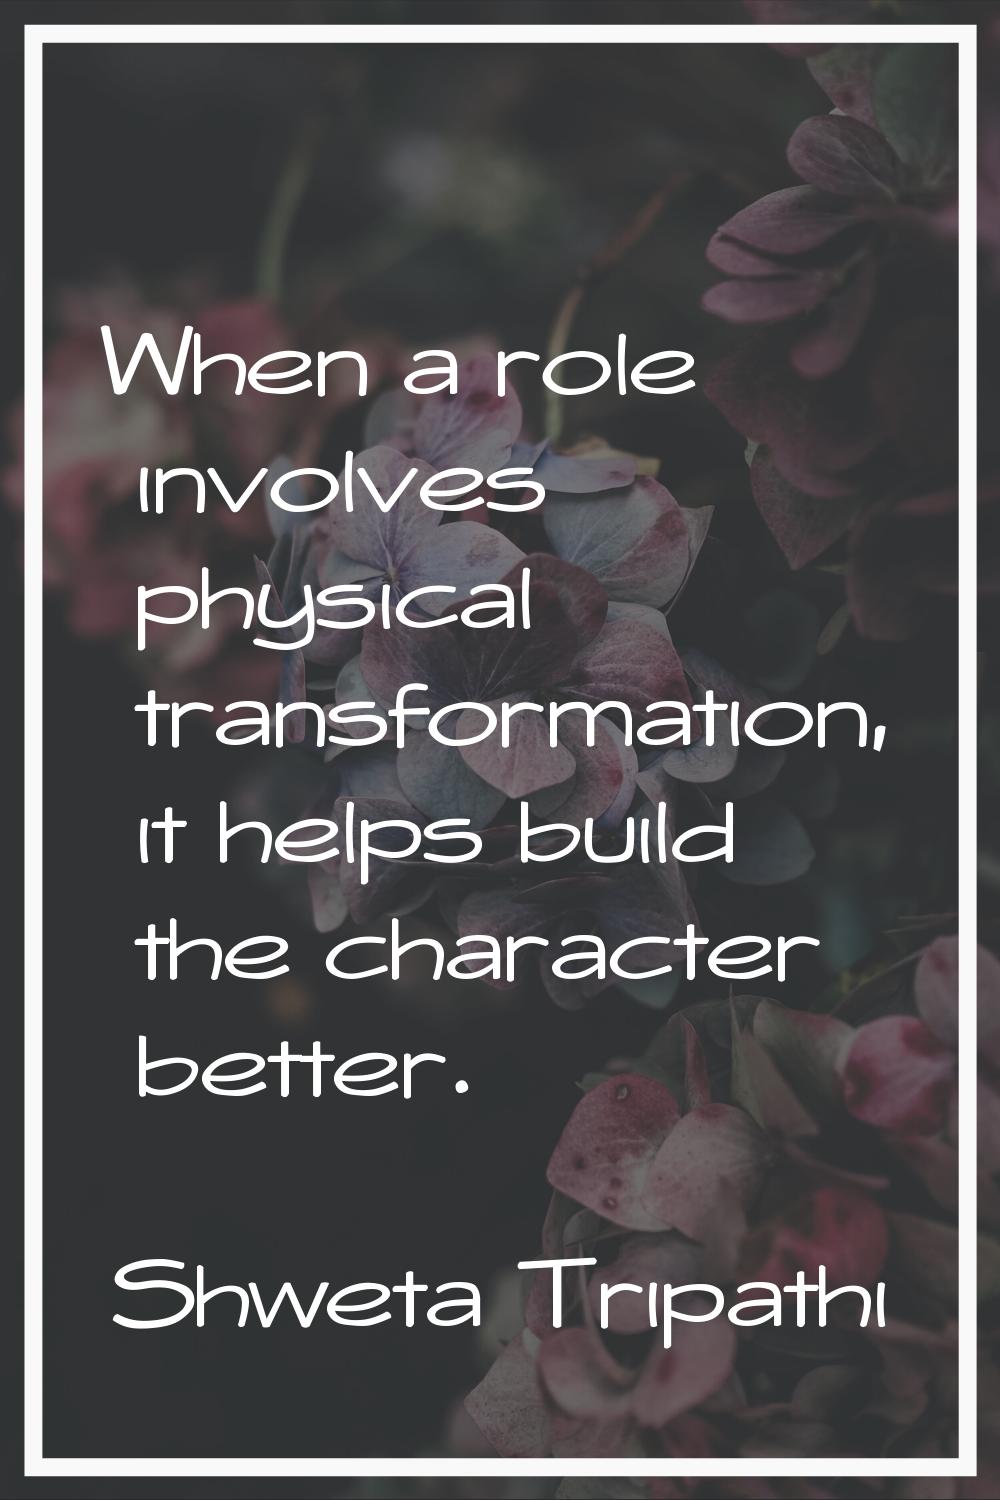 When a role involves physical transformation, it helps build the character better.